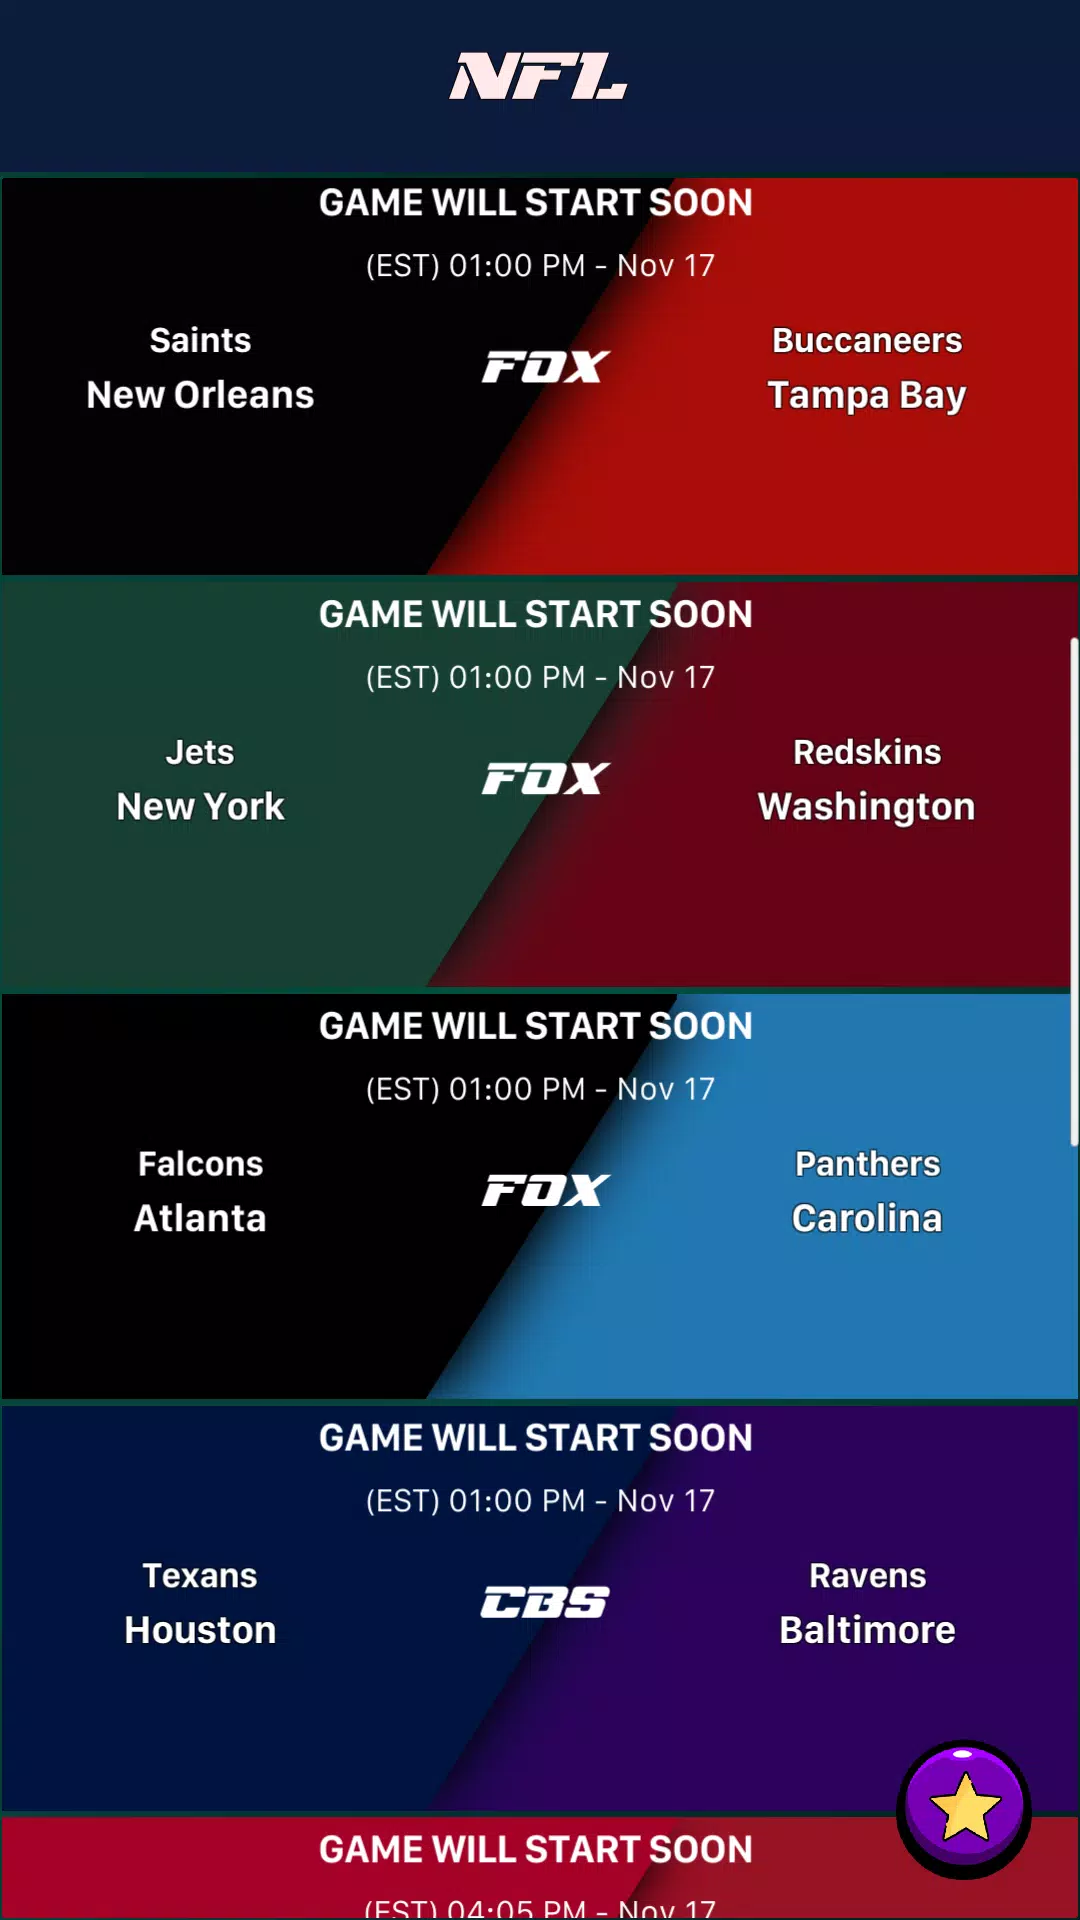 Live Streaming NFL NCAAF NBA - Apps on Google Play